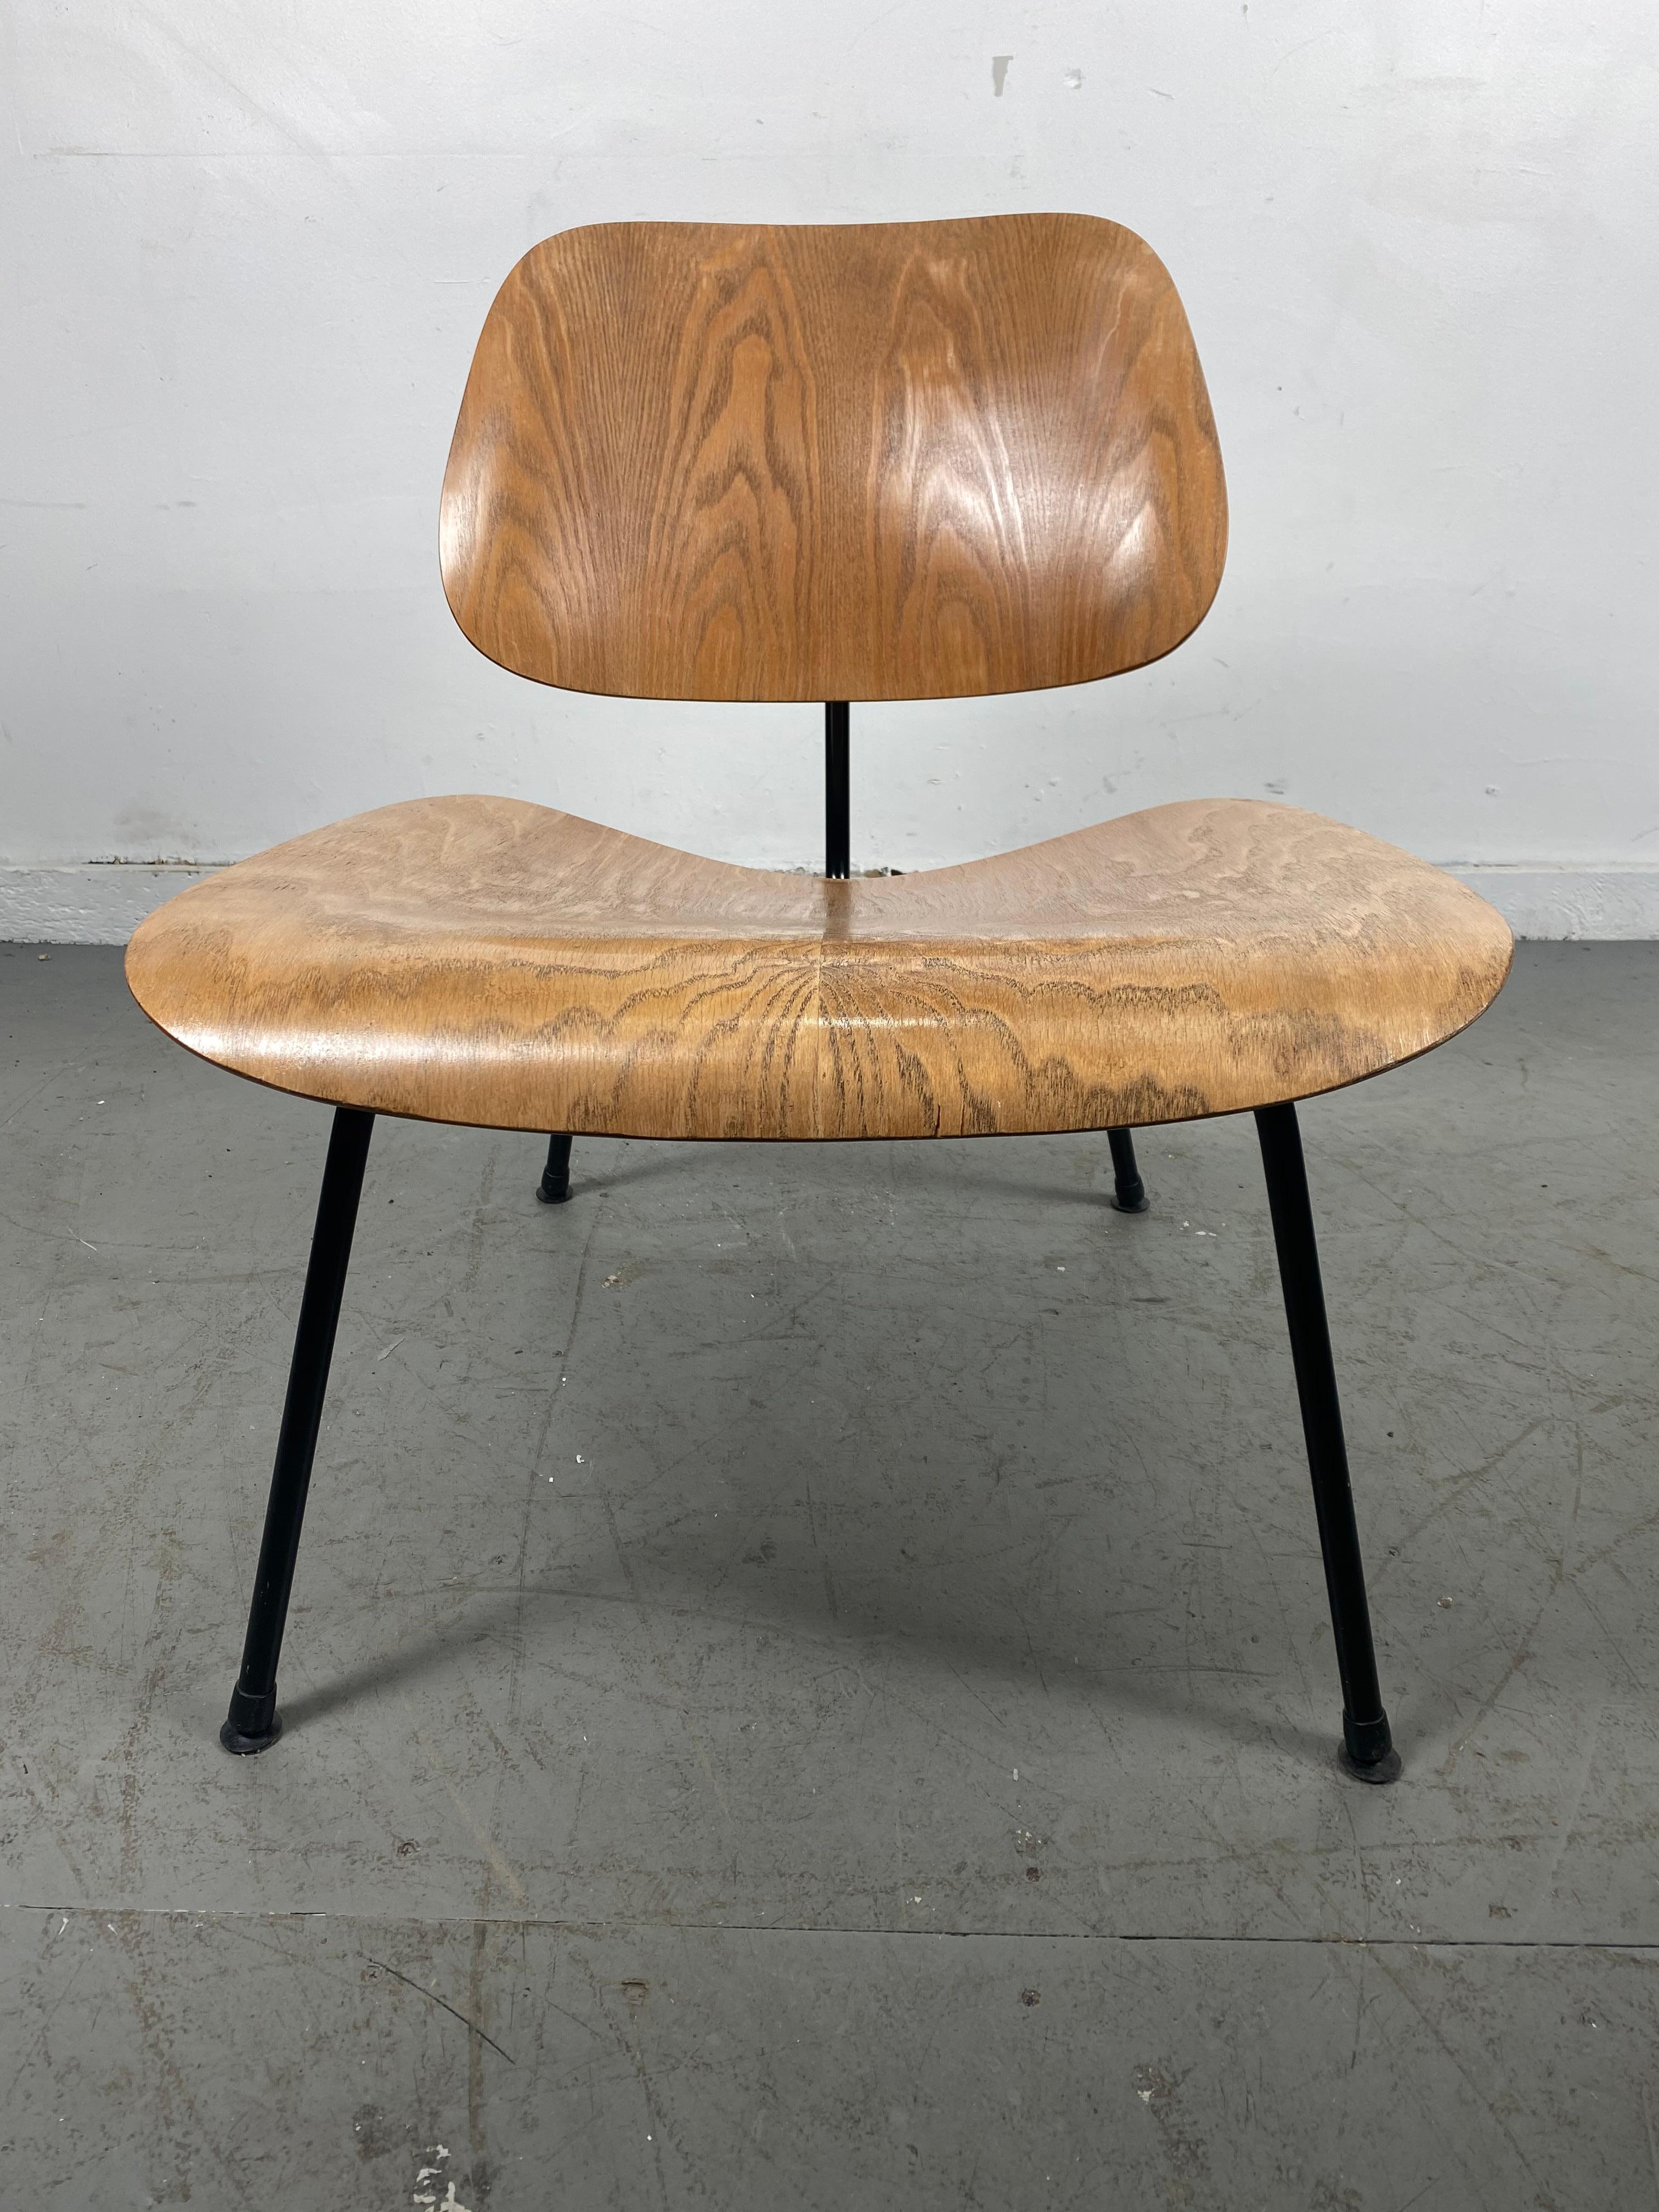 Early Eames LCM lounge chair, Herman Miller, USA, 1950s, ash with black base, wonderful example, great original finish, patina, retains impressed LCM under potato chip seat, Classic functional sculpture, art.